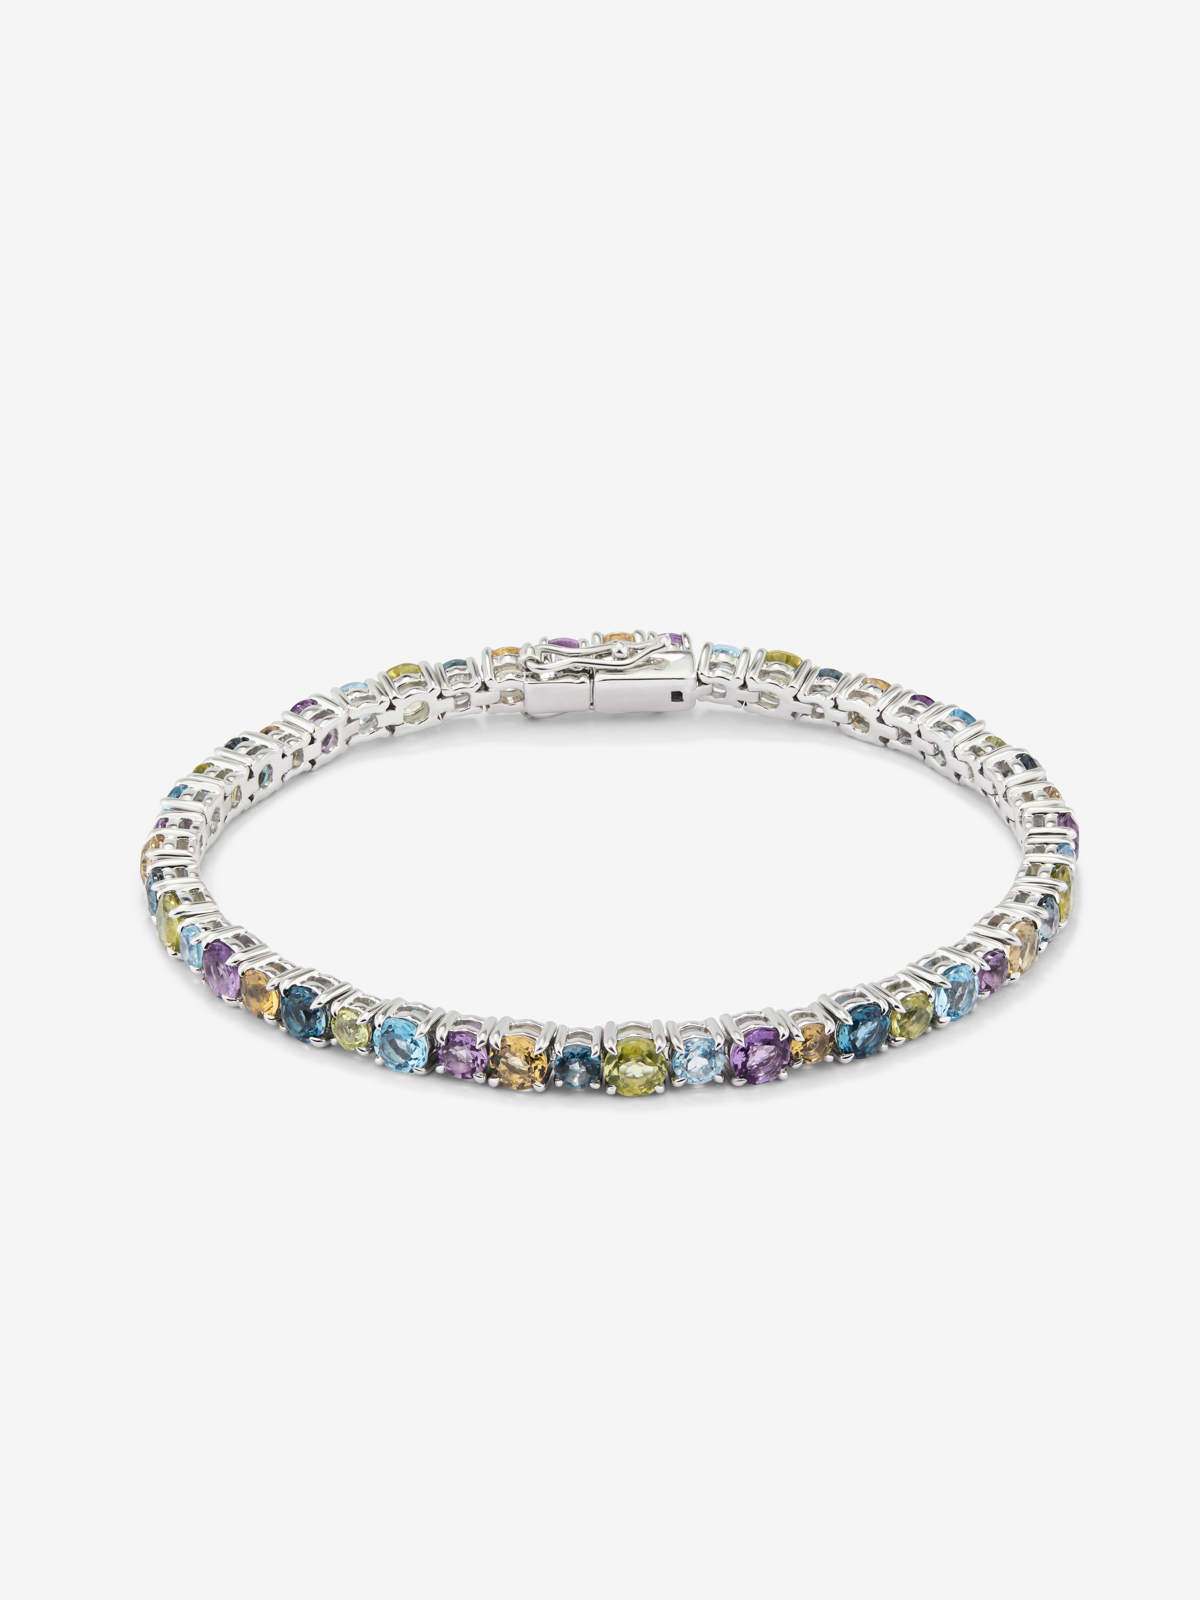 925 silver riviere bracelet with multicolored gems